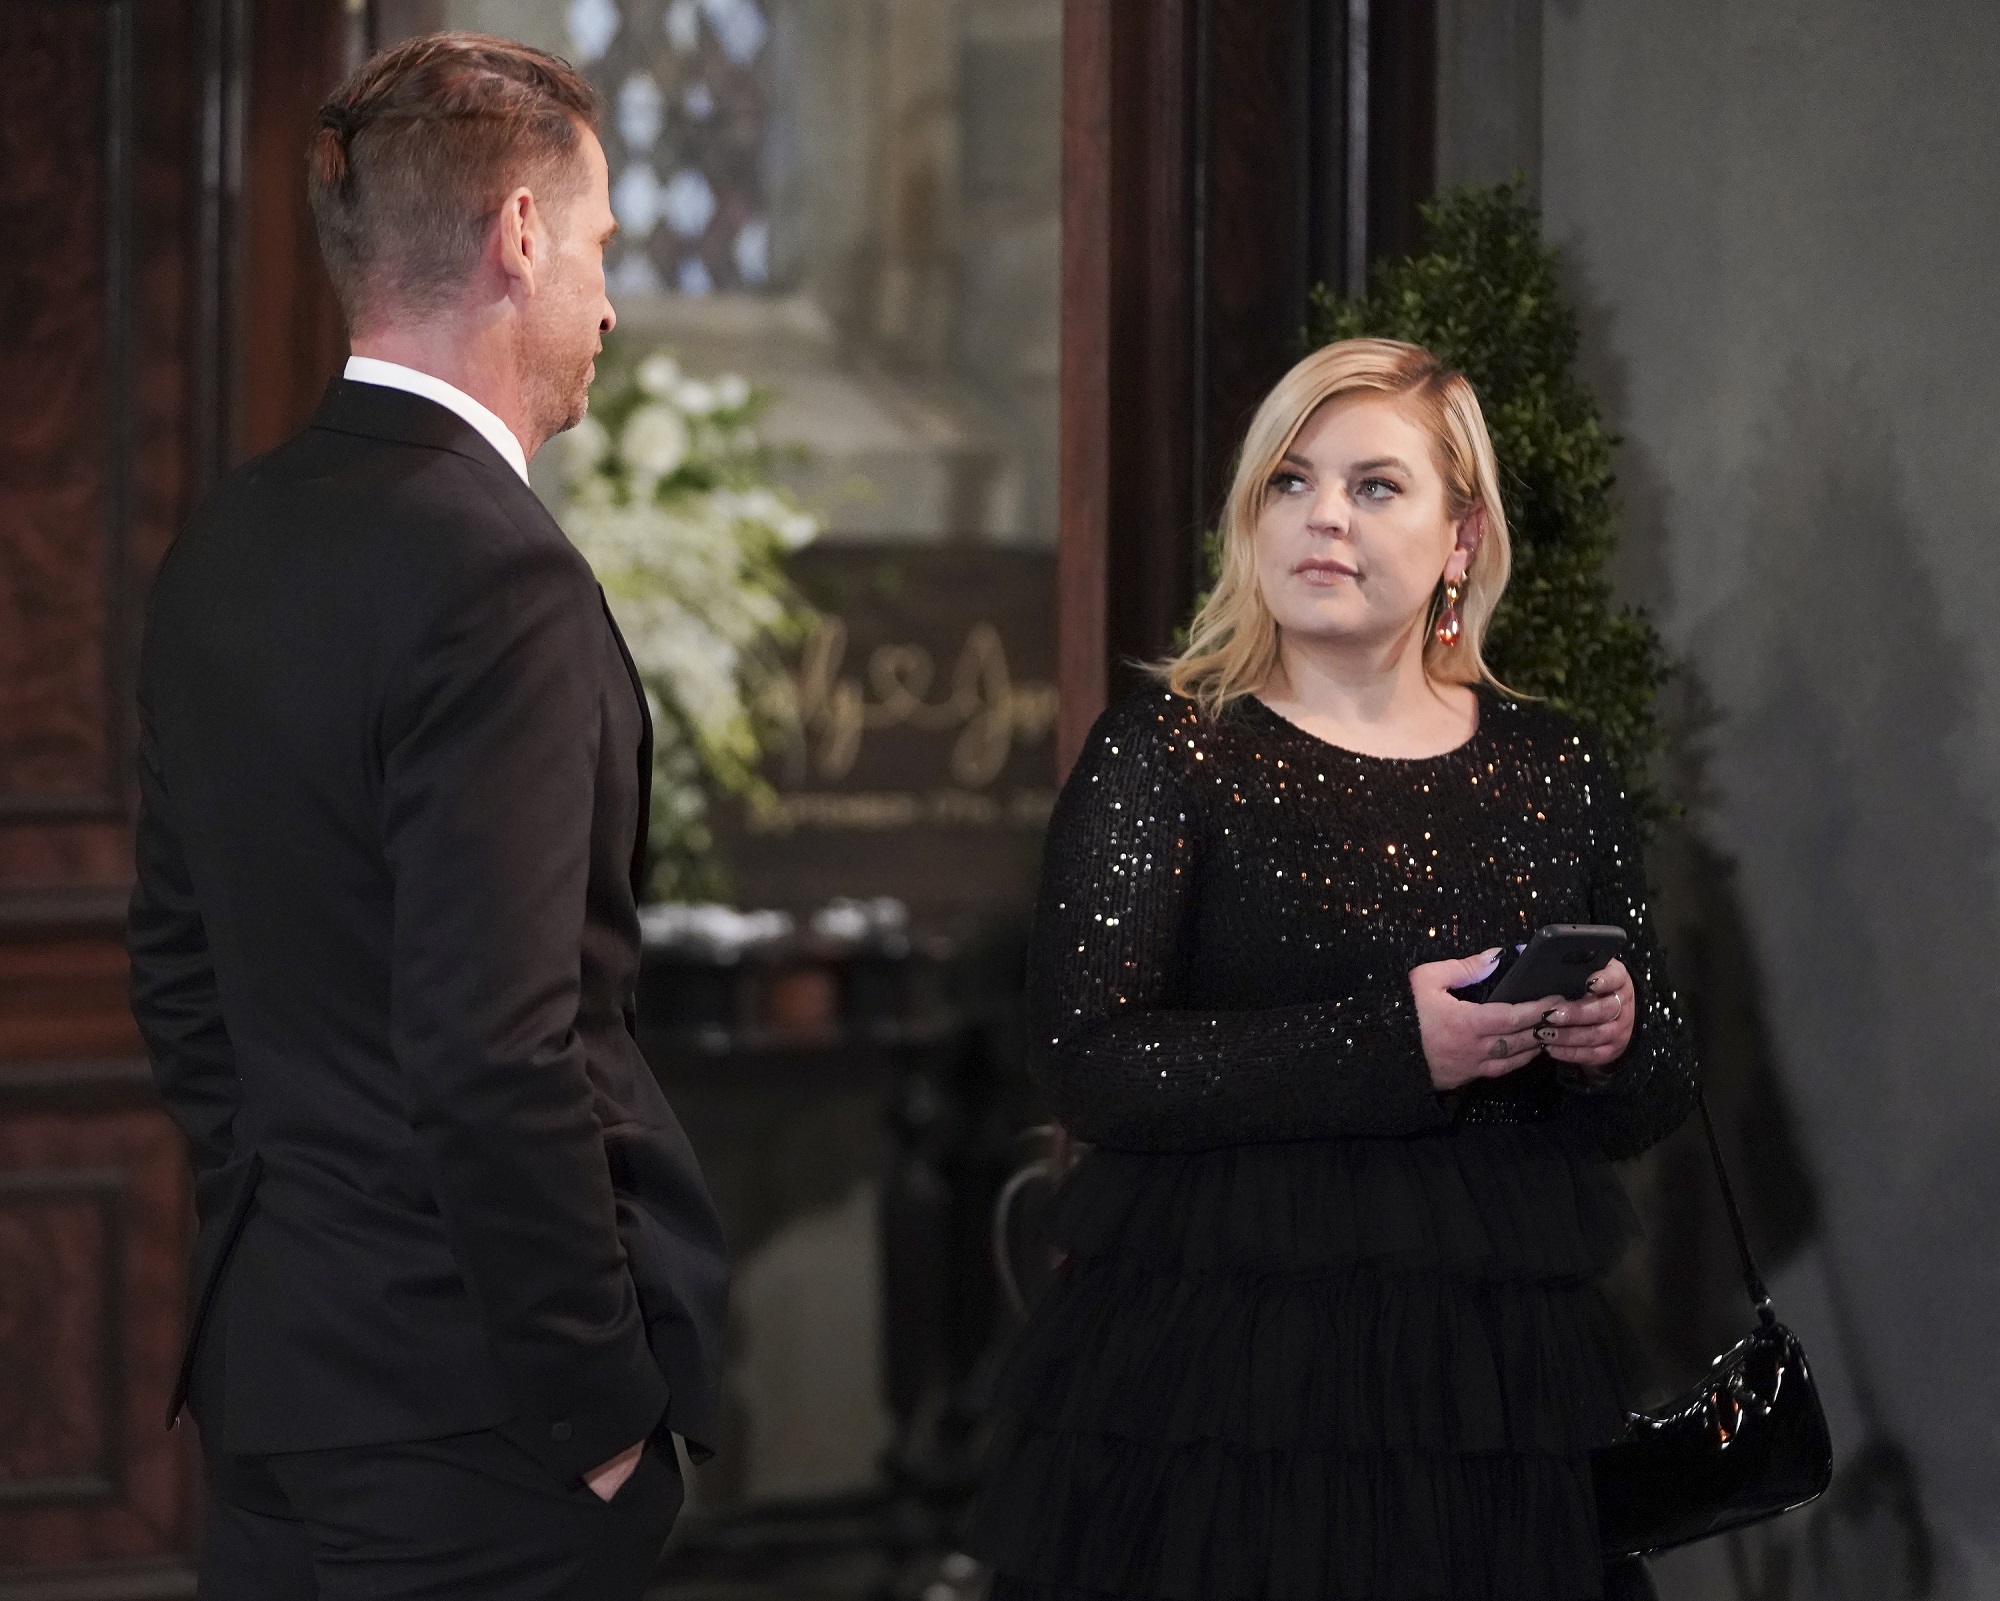 General Hospital speculation about cancelation focuses on Maxie, pictured here in a black long-sleeved sequined dress